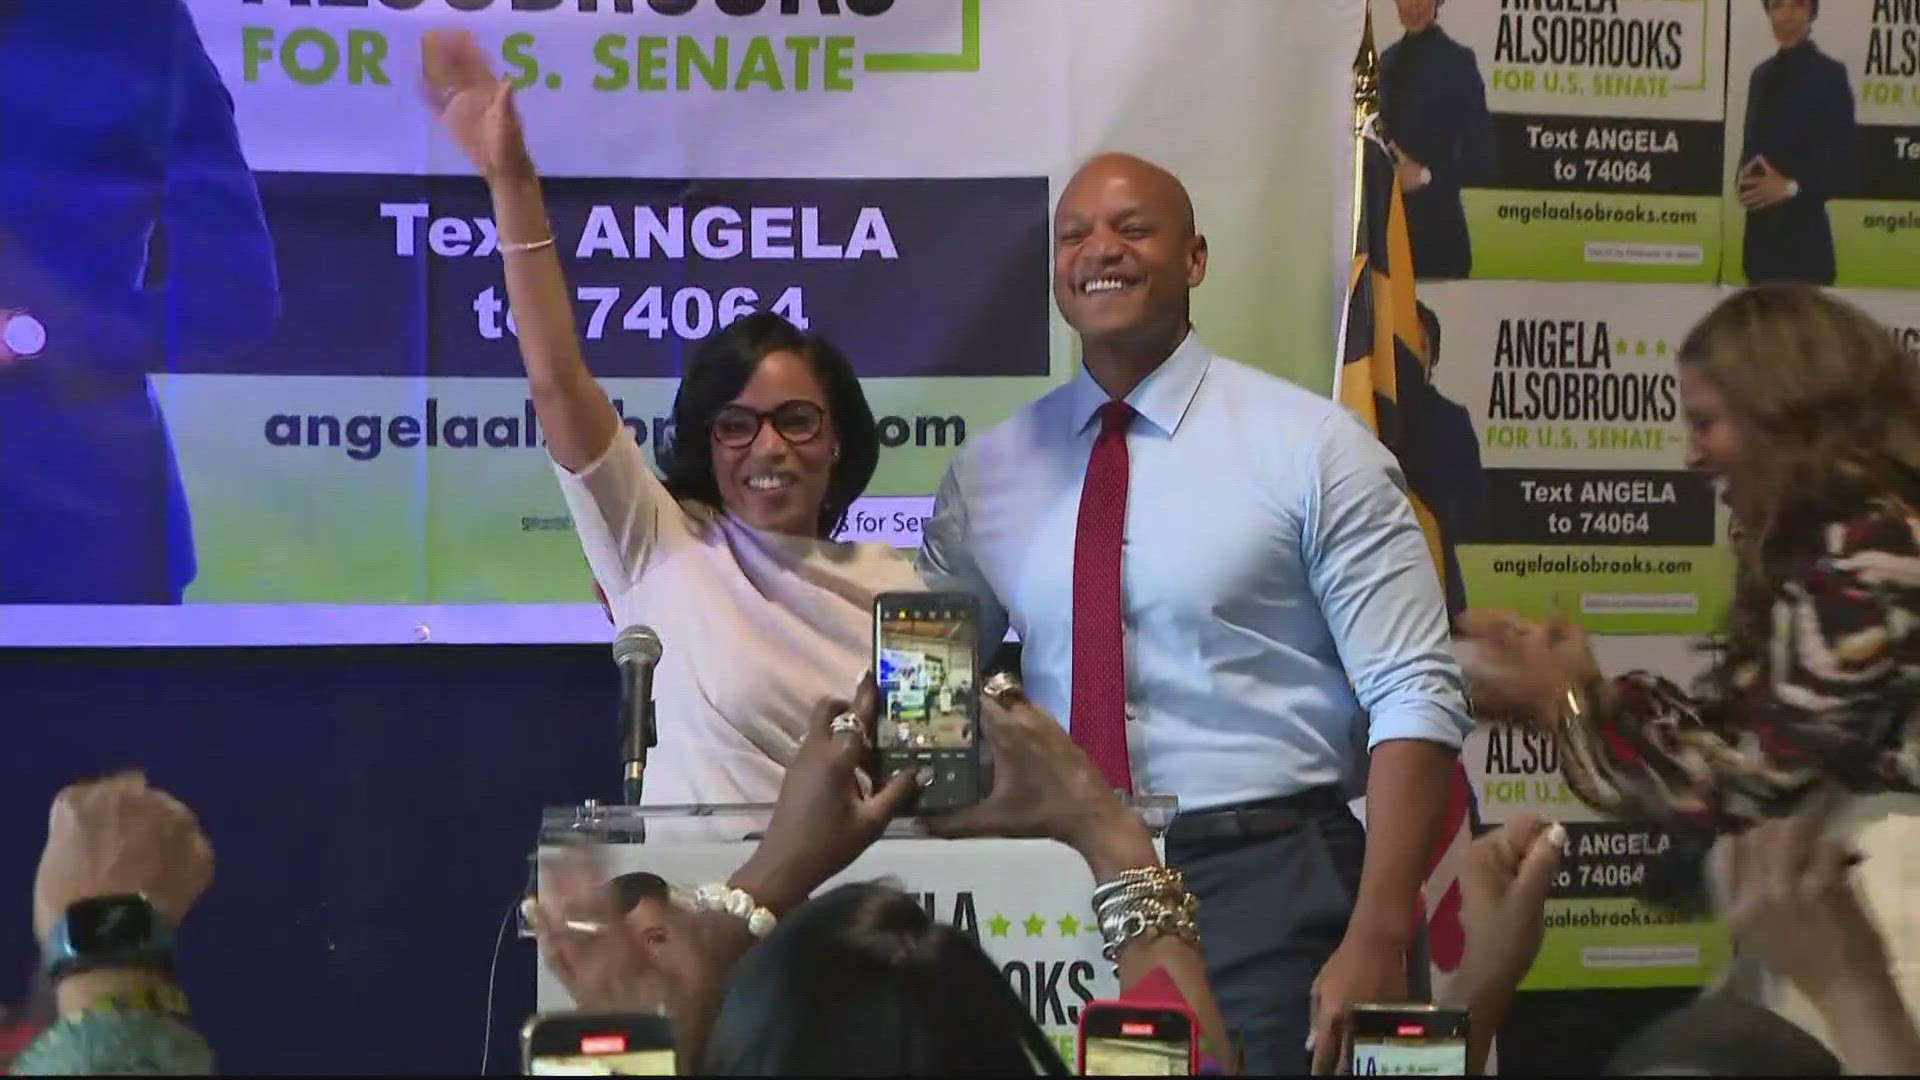 Angela Alsobrooks adding to her long list of endorsements. And this is a big one. Maryland Governor Wes Moore.